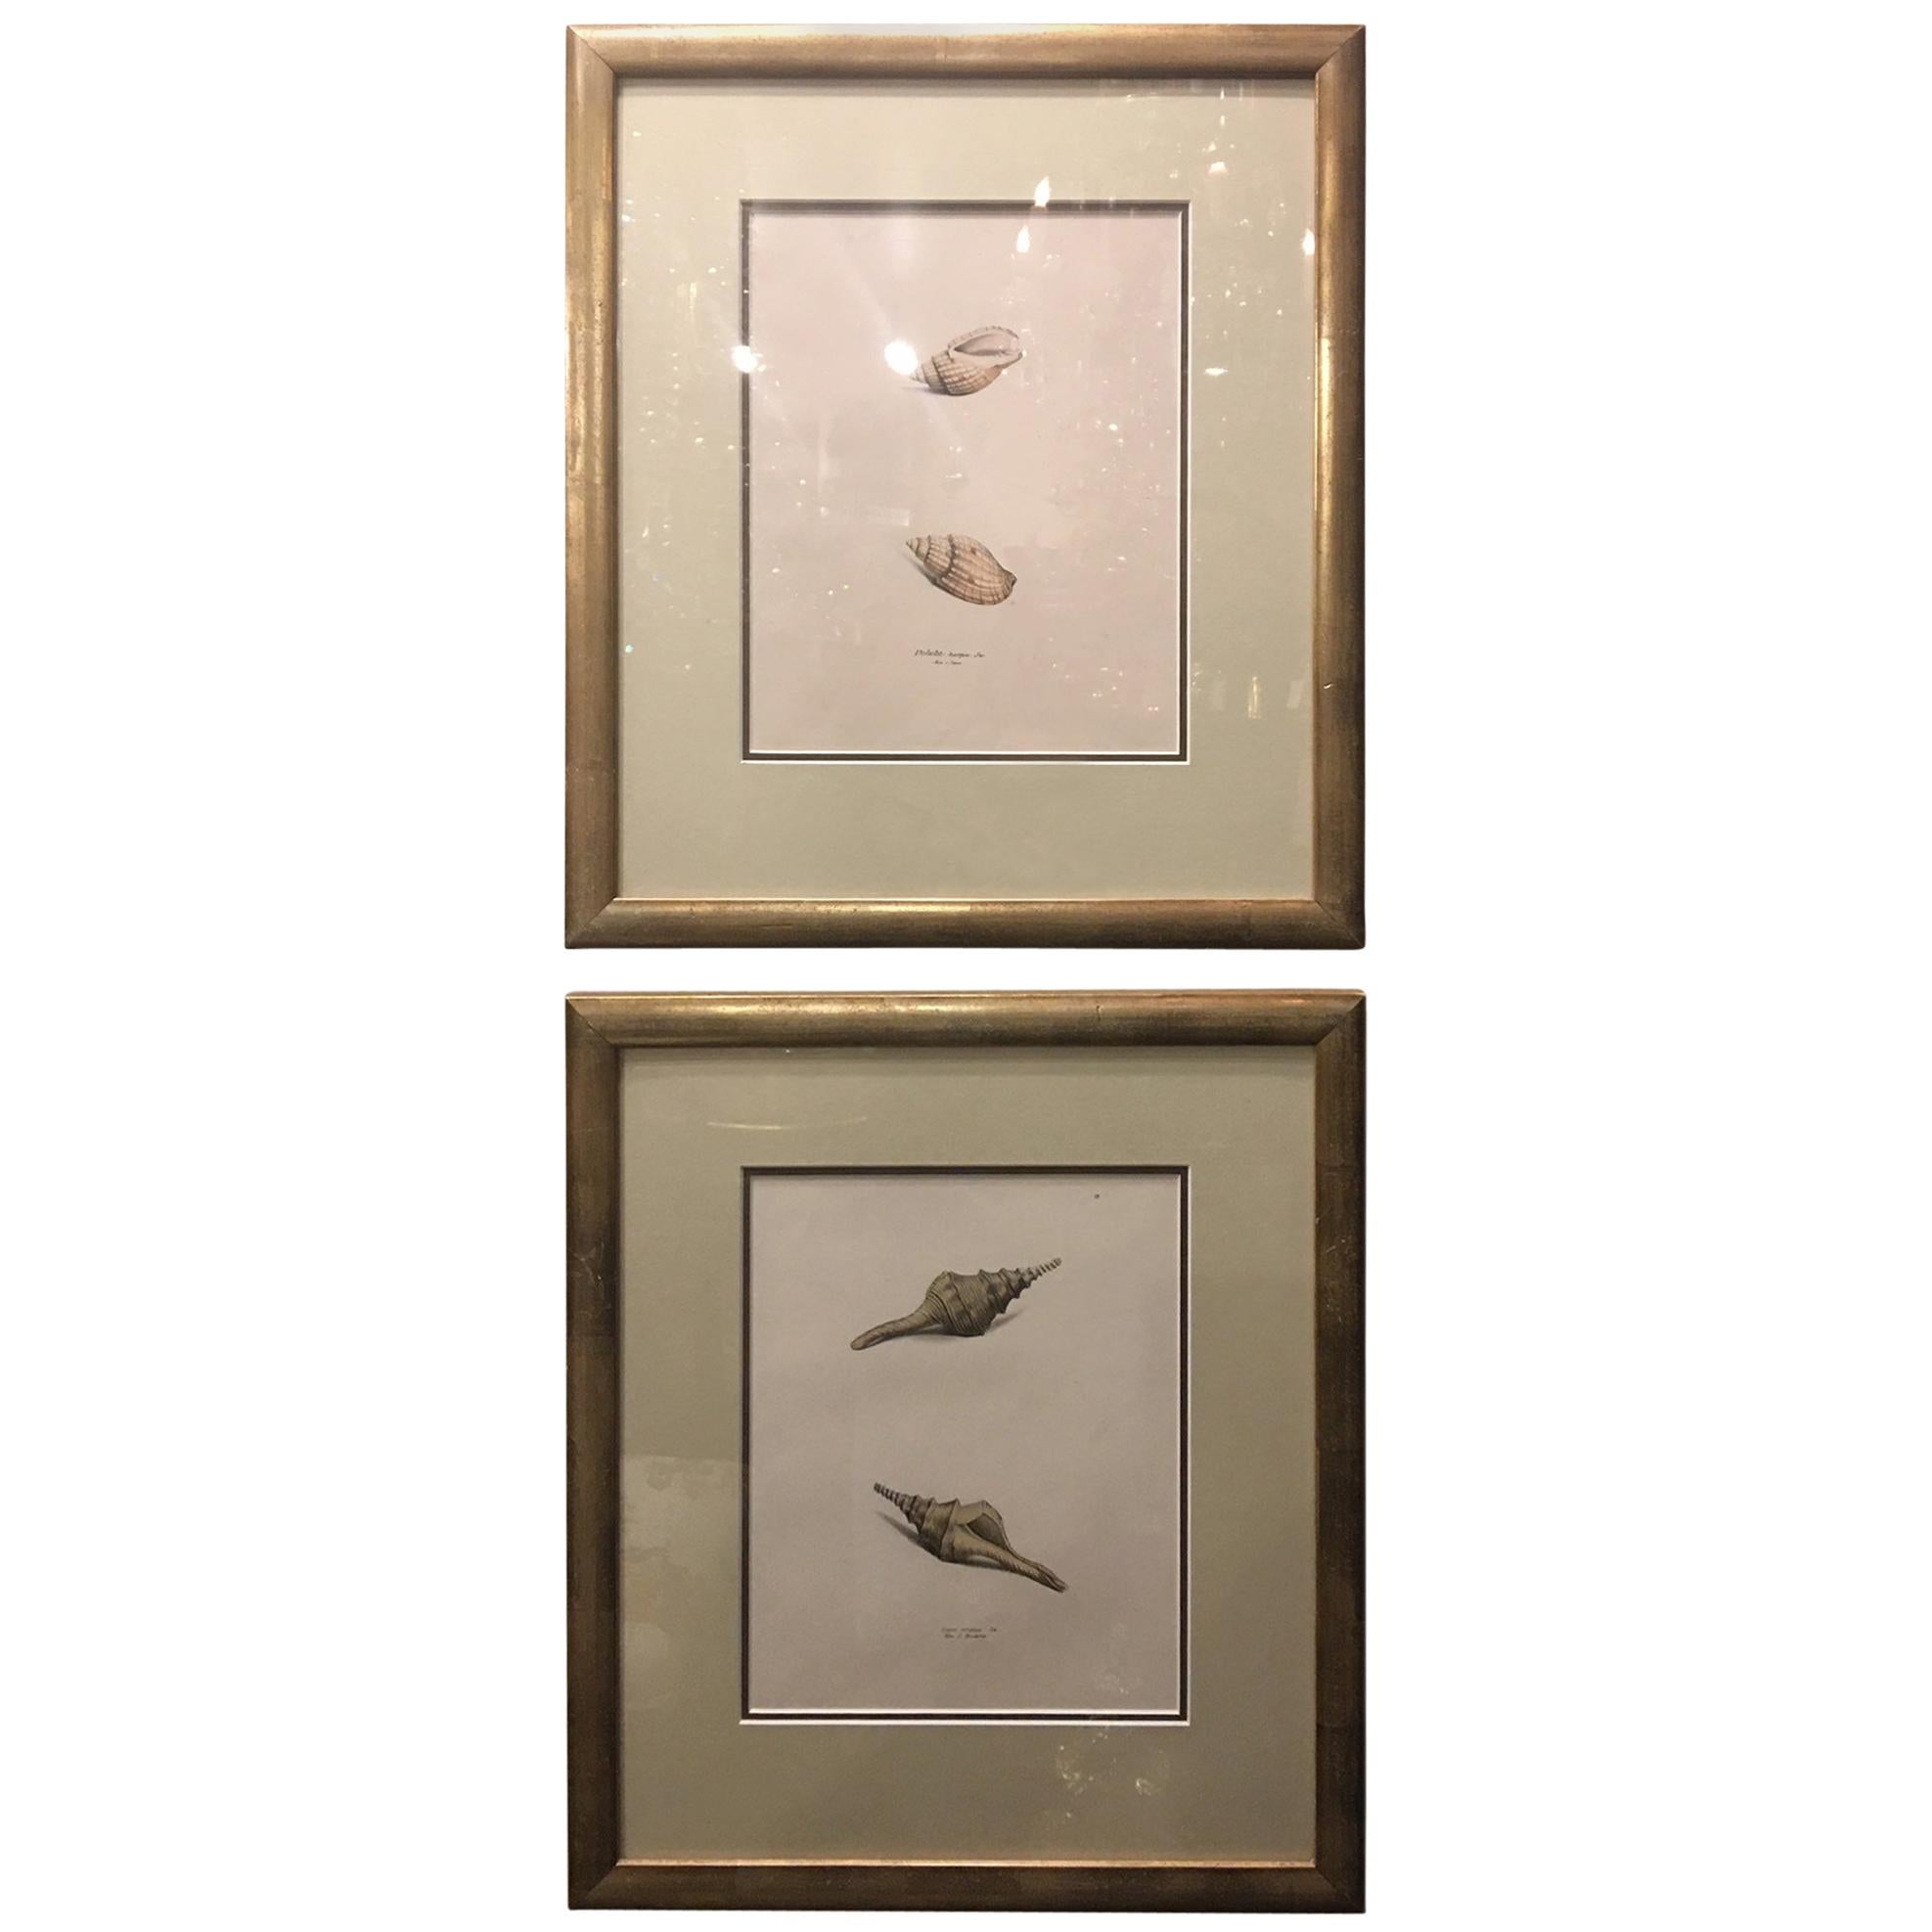 Continental School "Seashells", Pair of Hand-Colored Lithographs, 19th Century